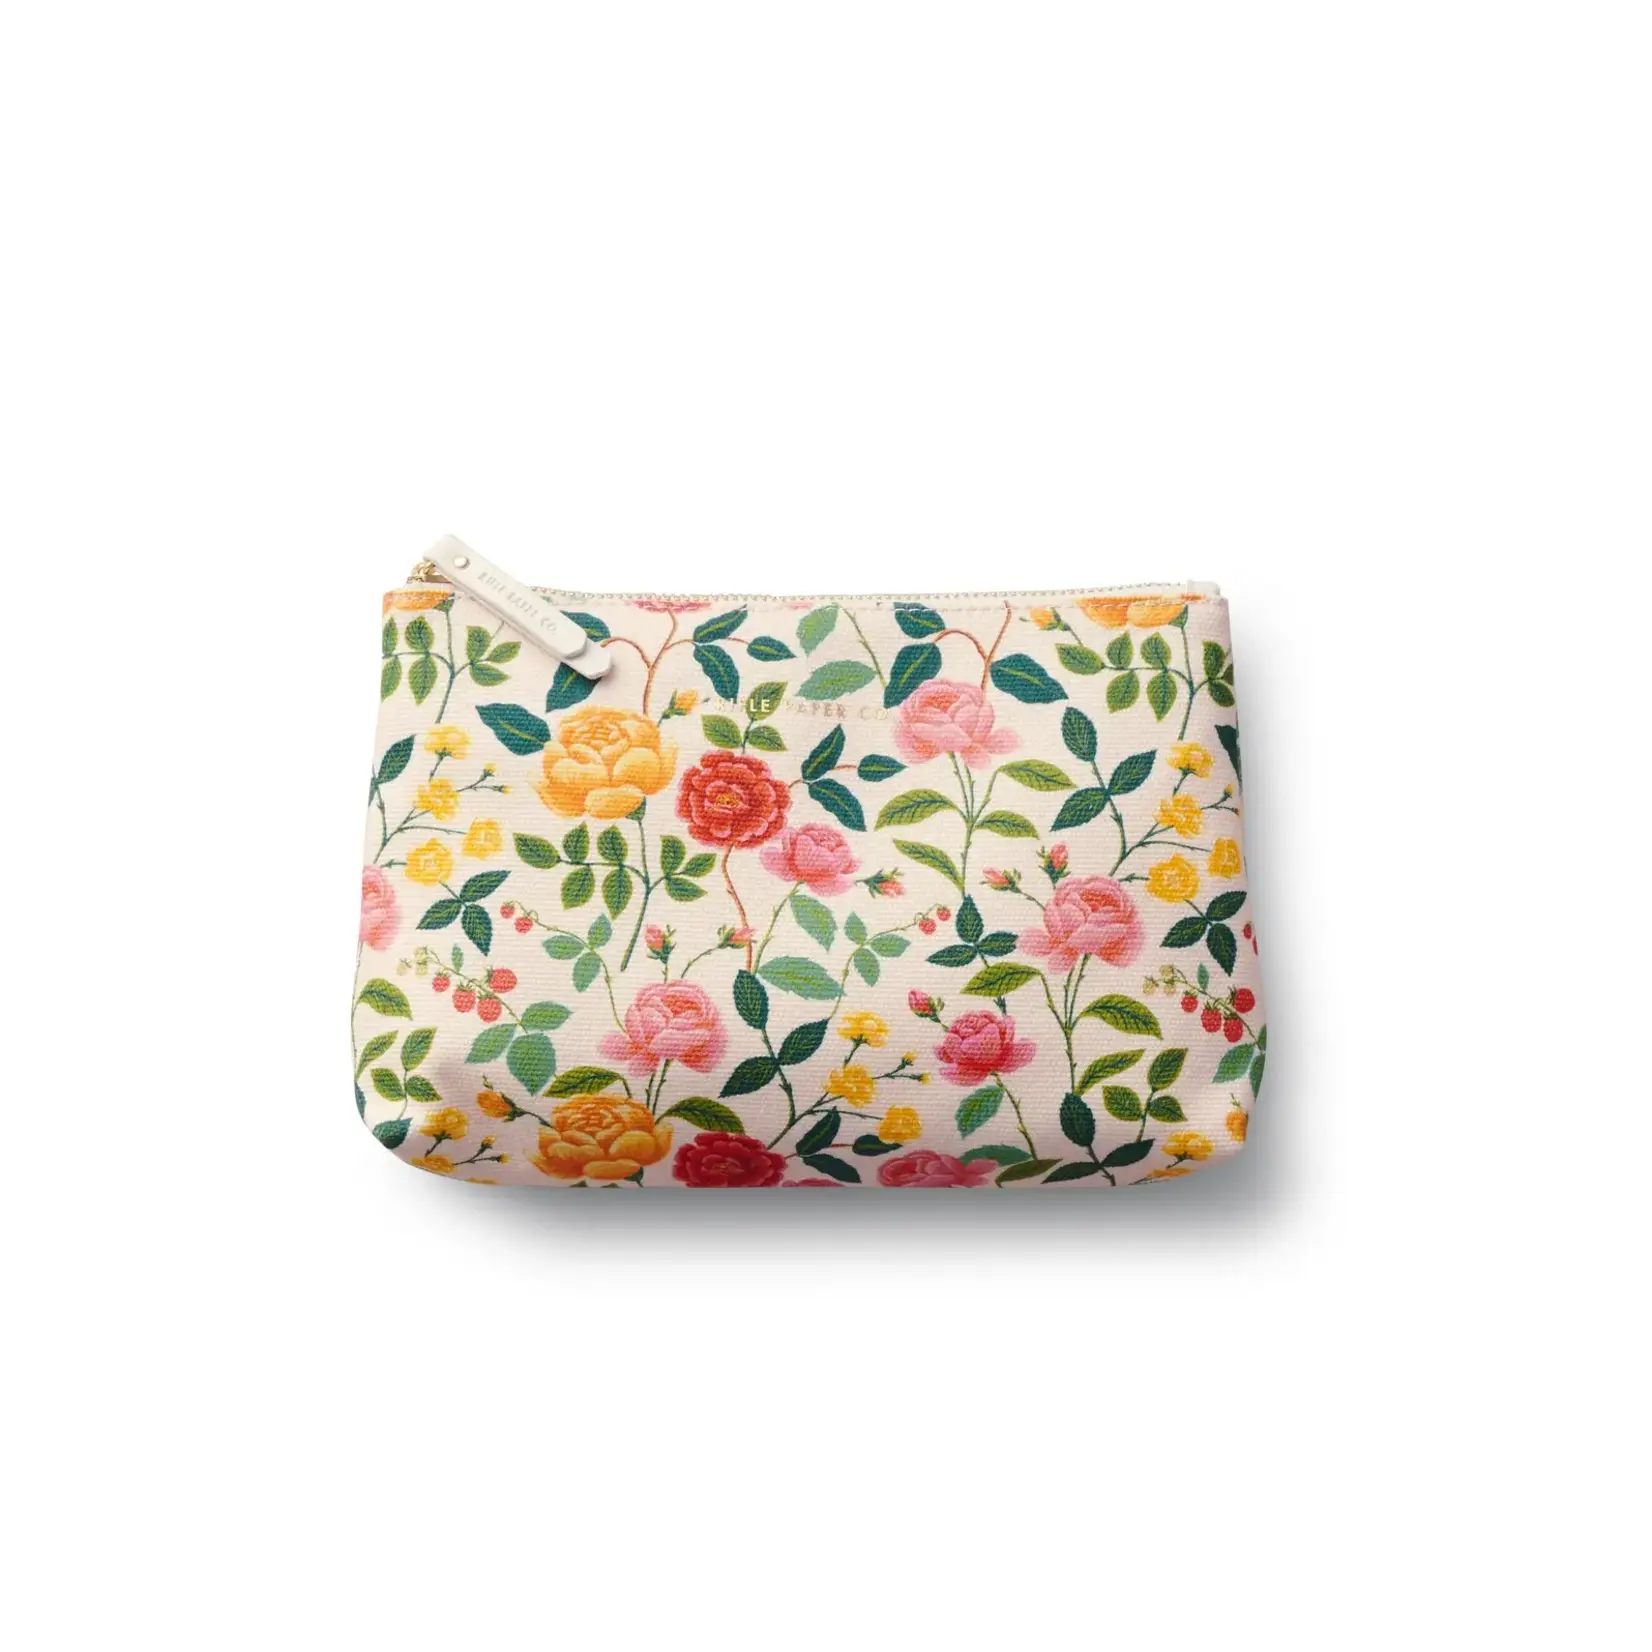 Rifle Paper Company Roses Set of 2 Zippered Pouch Set